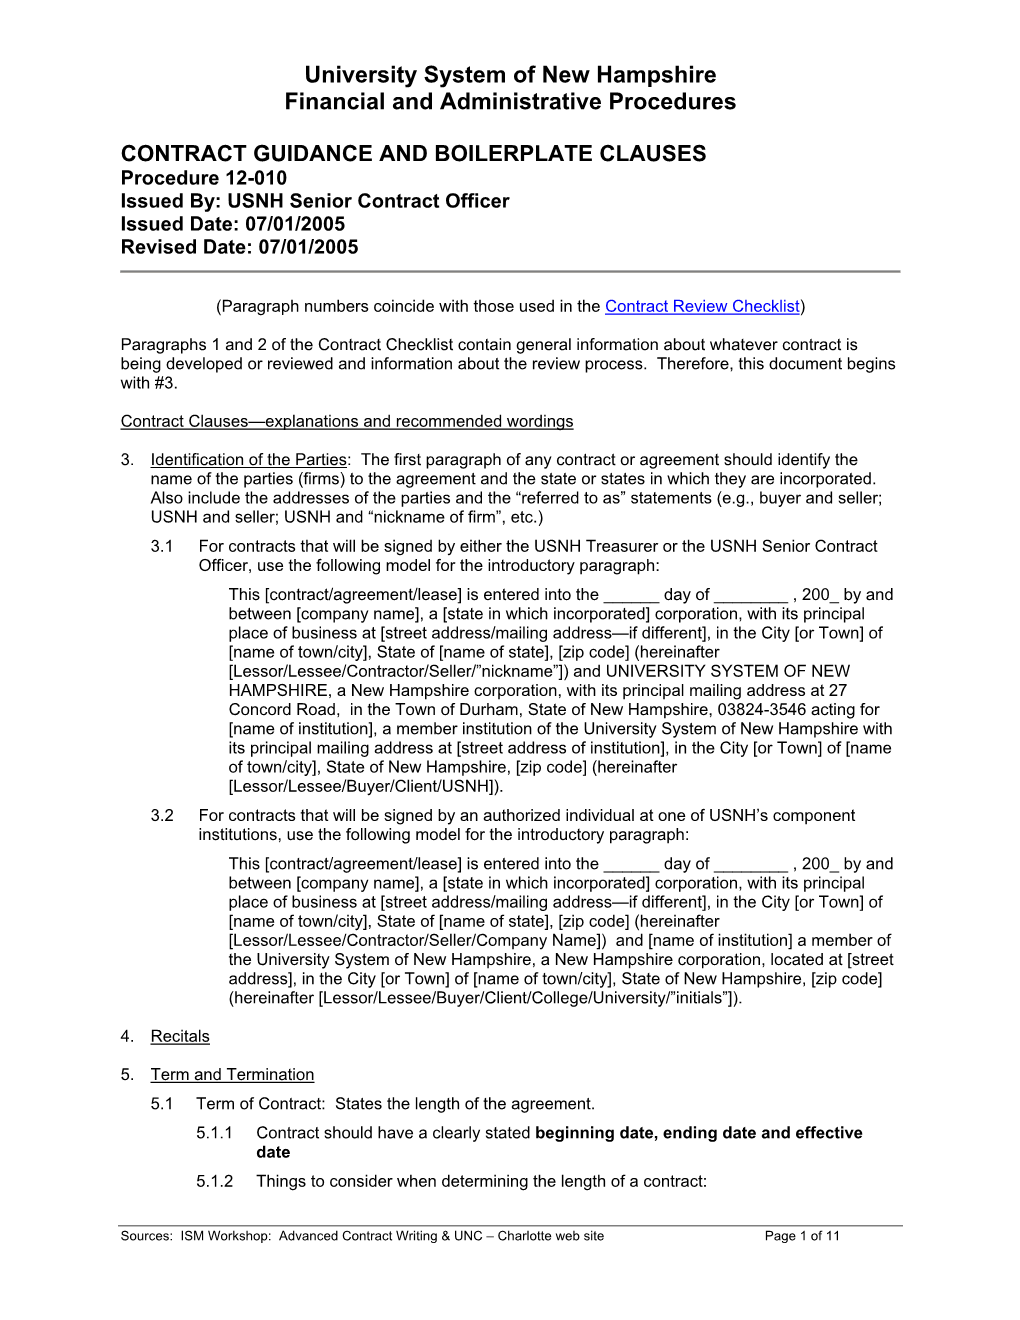 University System of New Hampshire Financial and Administrative Procedures CONTRACT GUIDANCE and BOILERPLATE CLAUSES